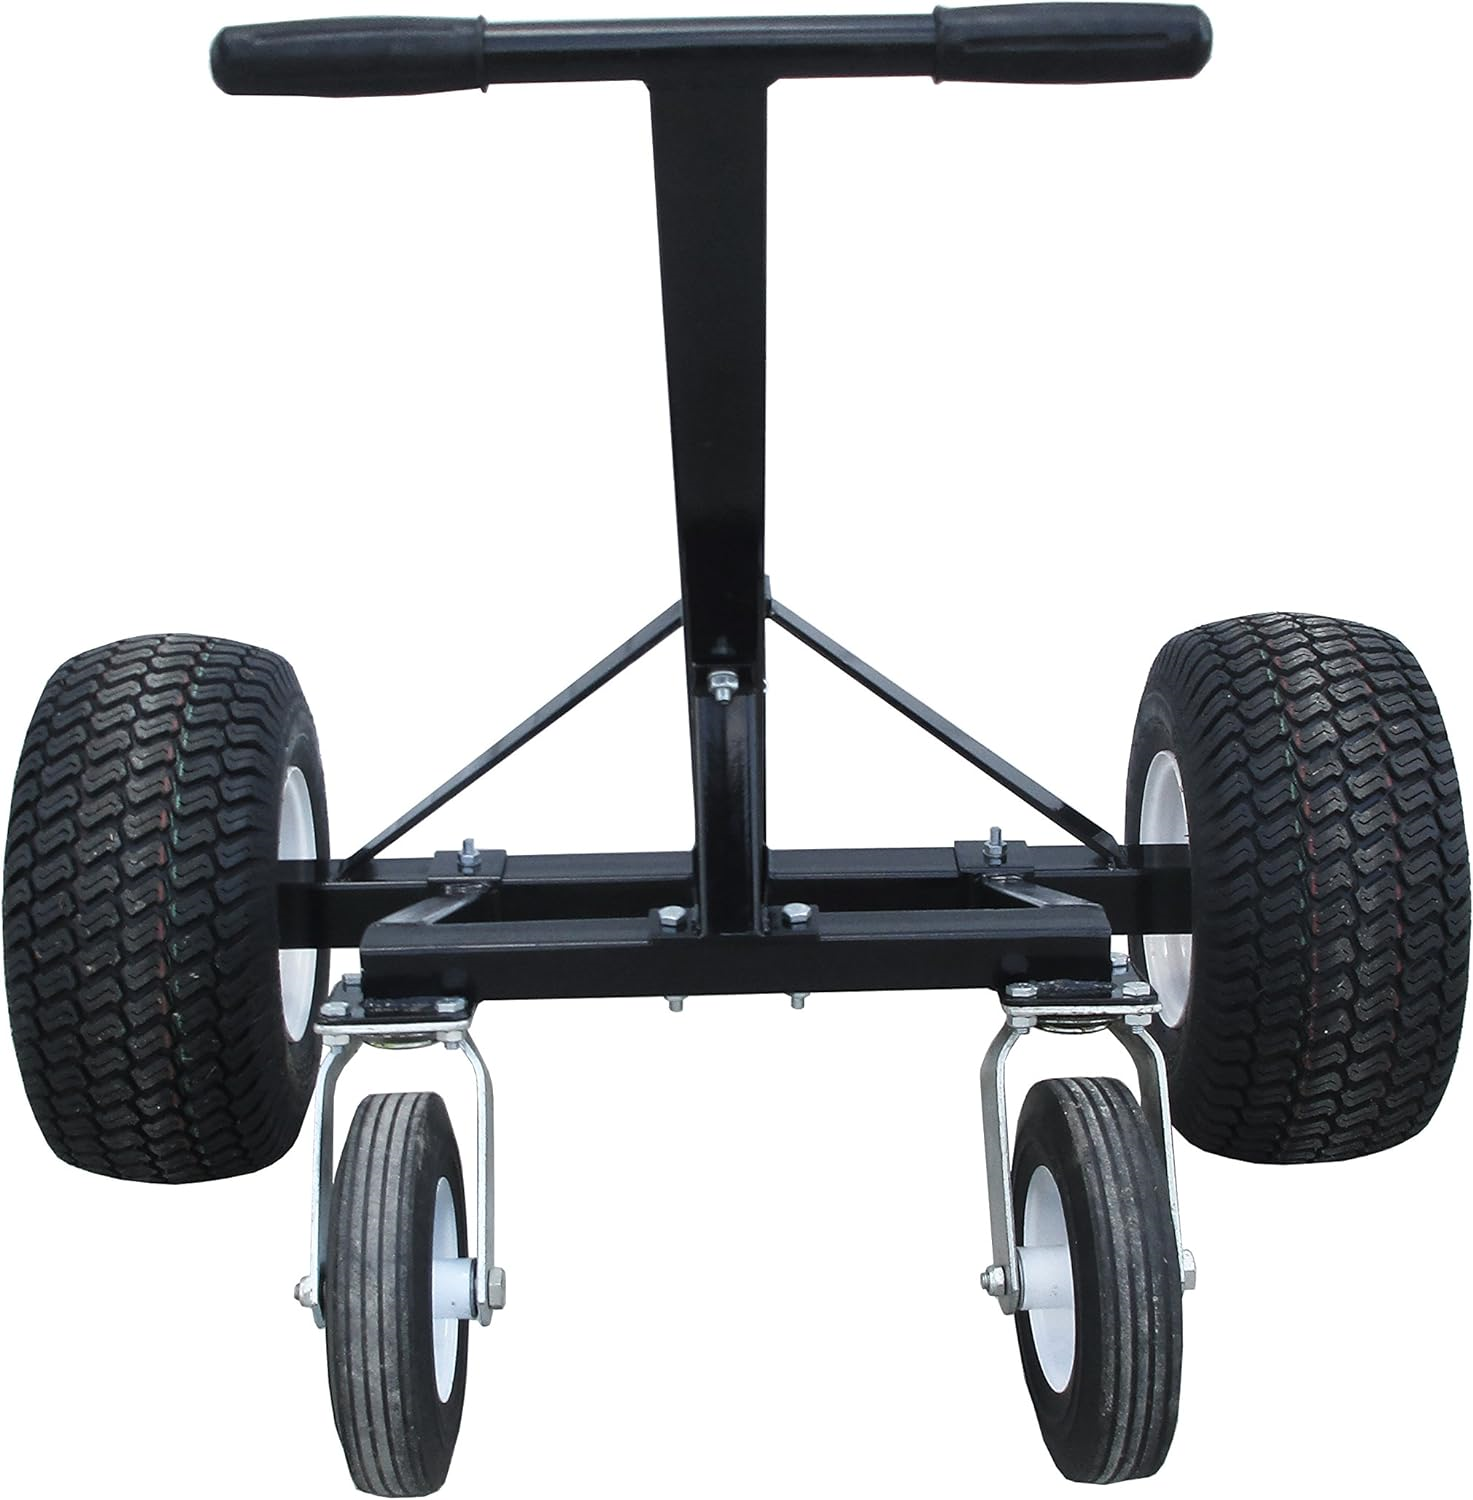 Tow Tuff, Tow Tuff TMD-15002C Trailer Dolly Adjustable 23.25" to 37" Max Weight 1500lbs Works with 2" Coupler or Larger New